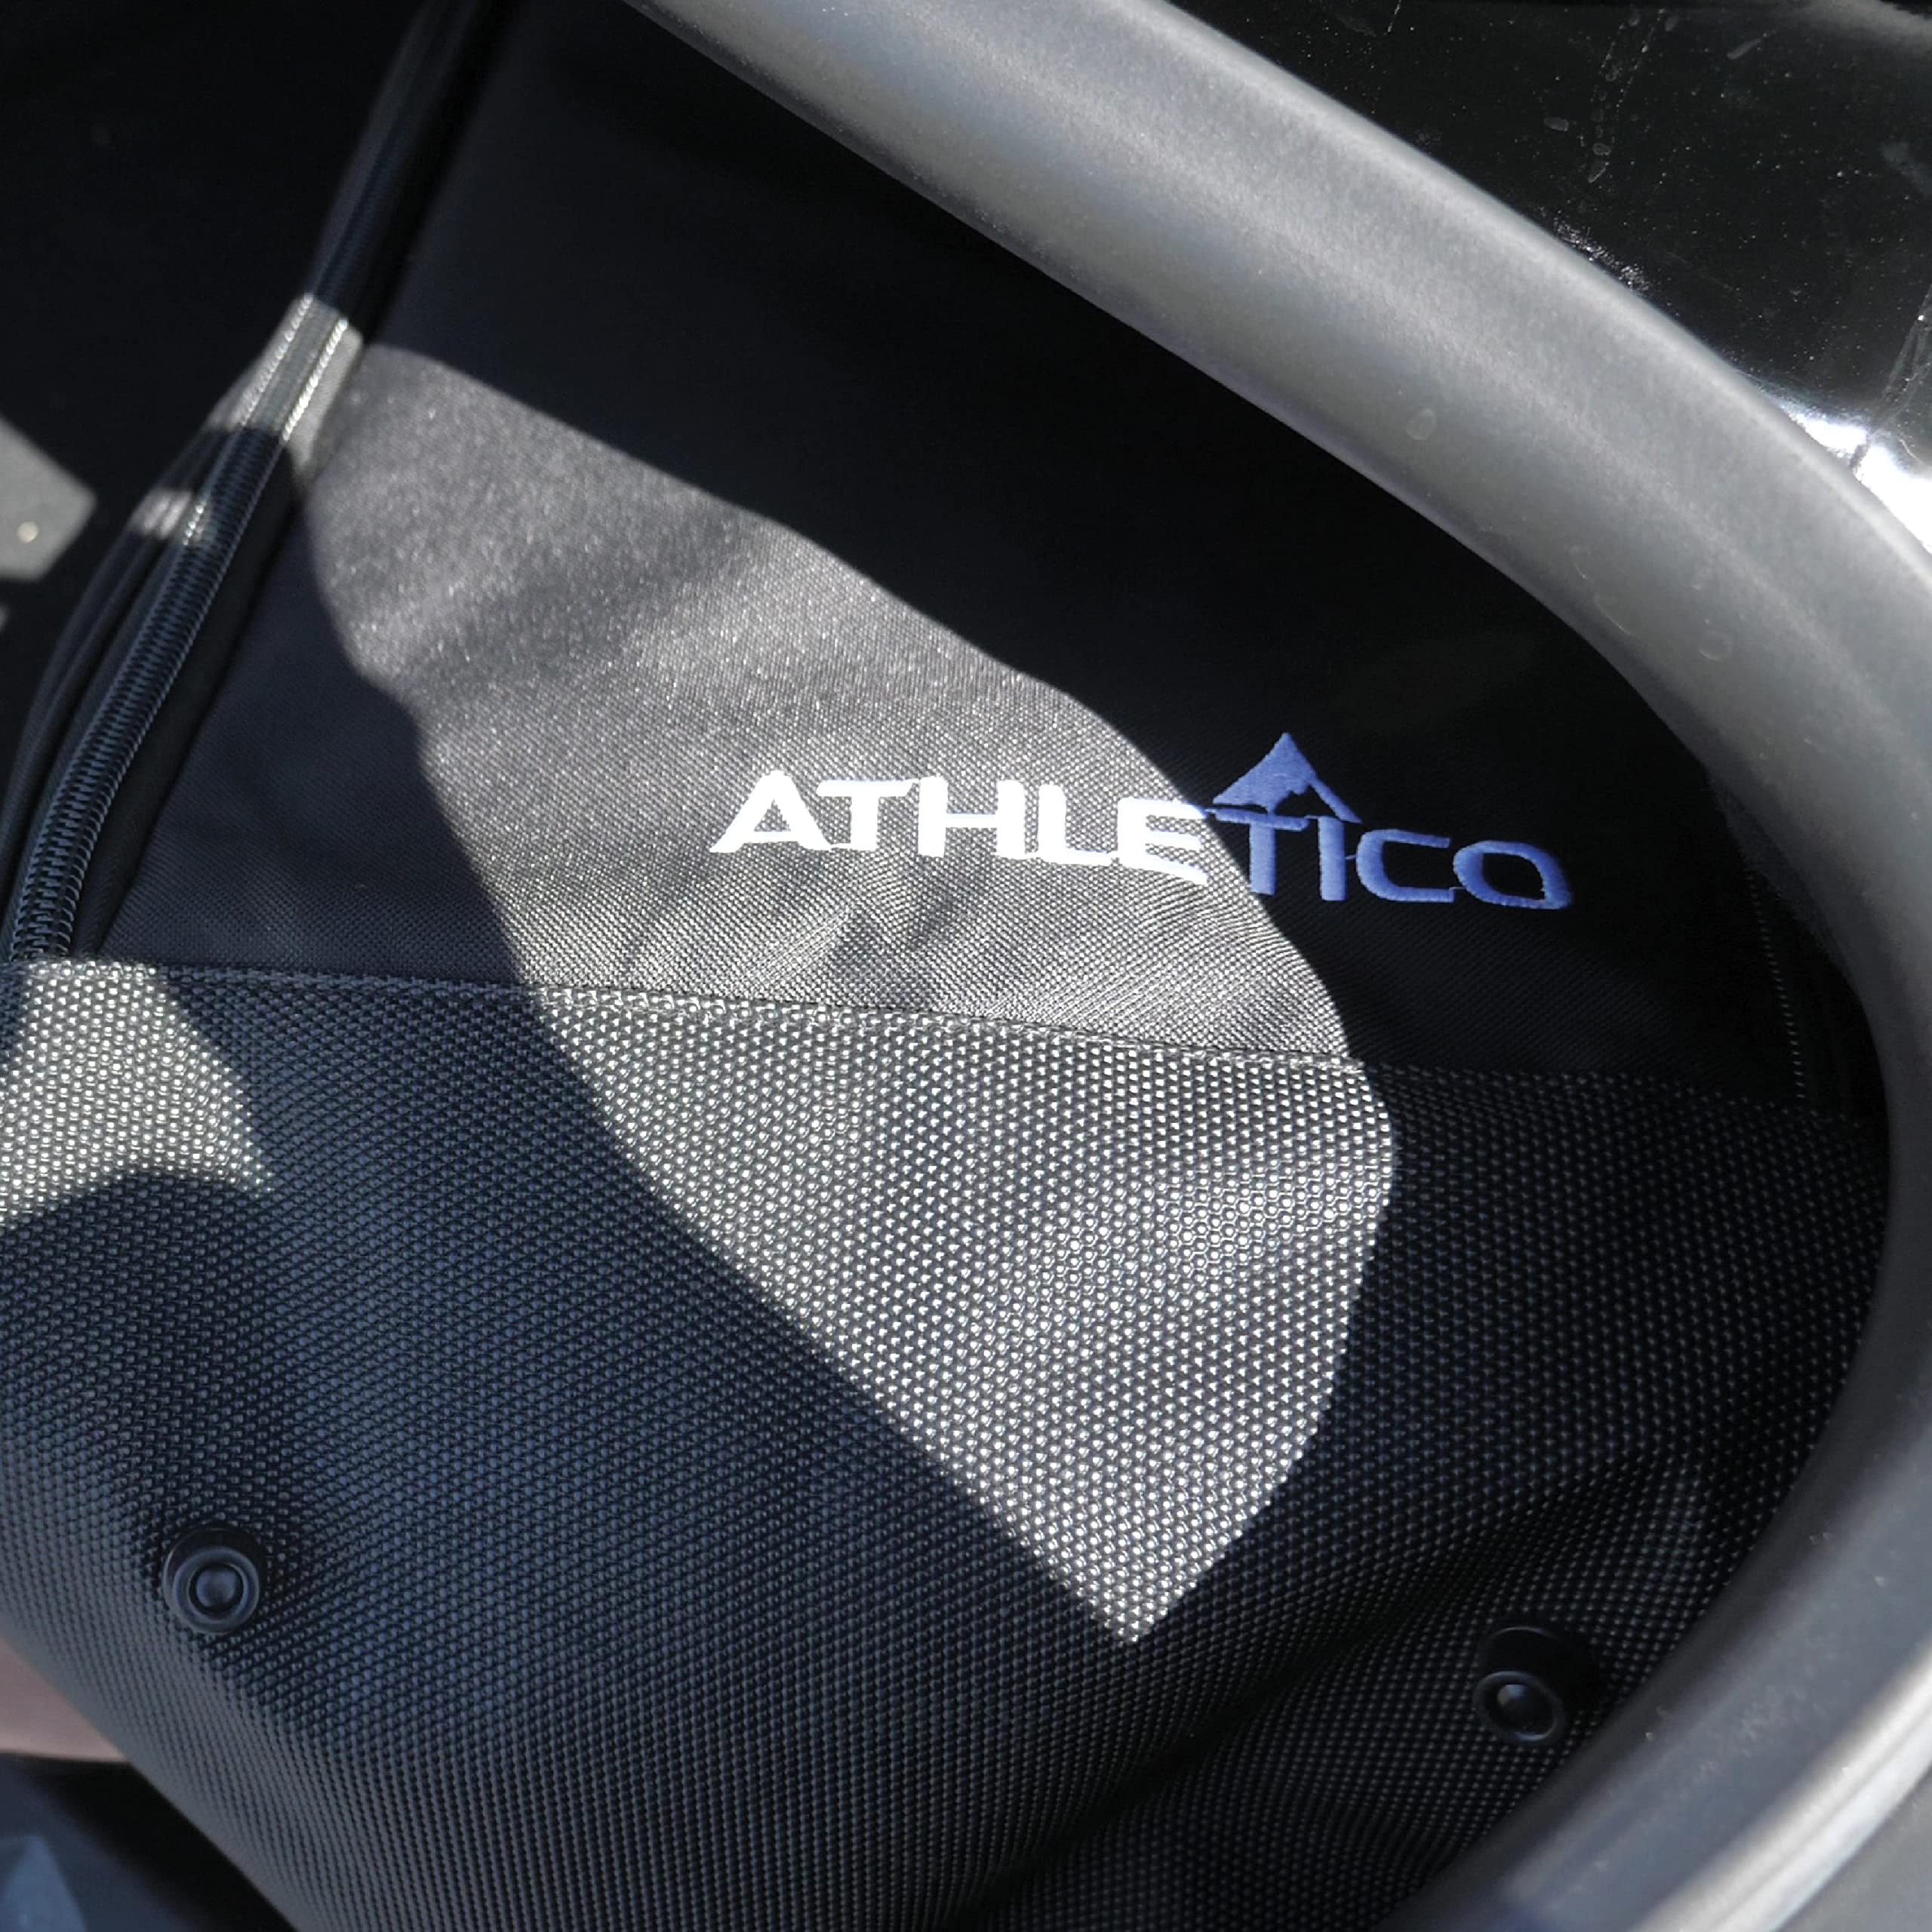 Athletico Padded Golf Travel Bag - Golf Travel Bags for Airlines Protects Golf Clubs  - Acceptable